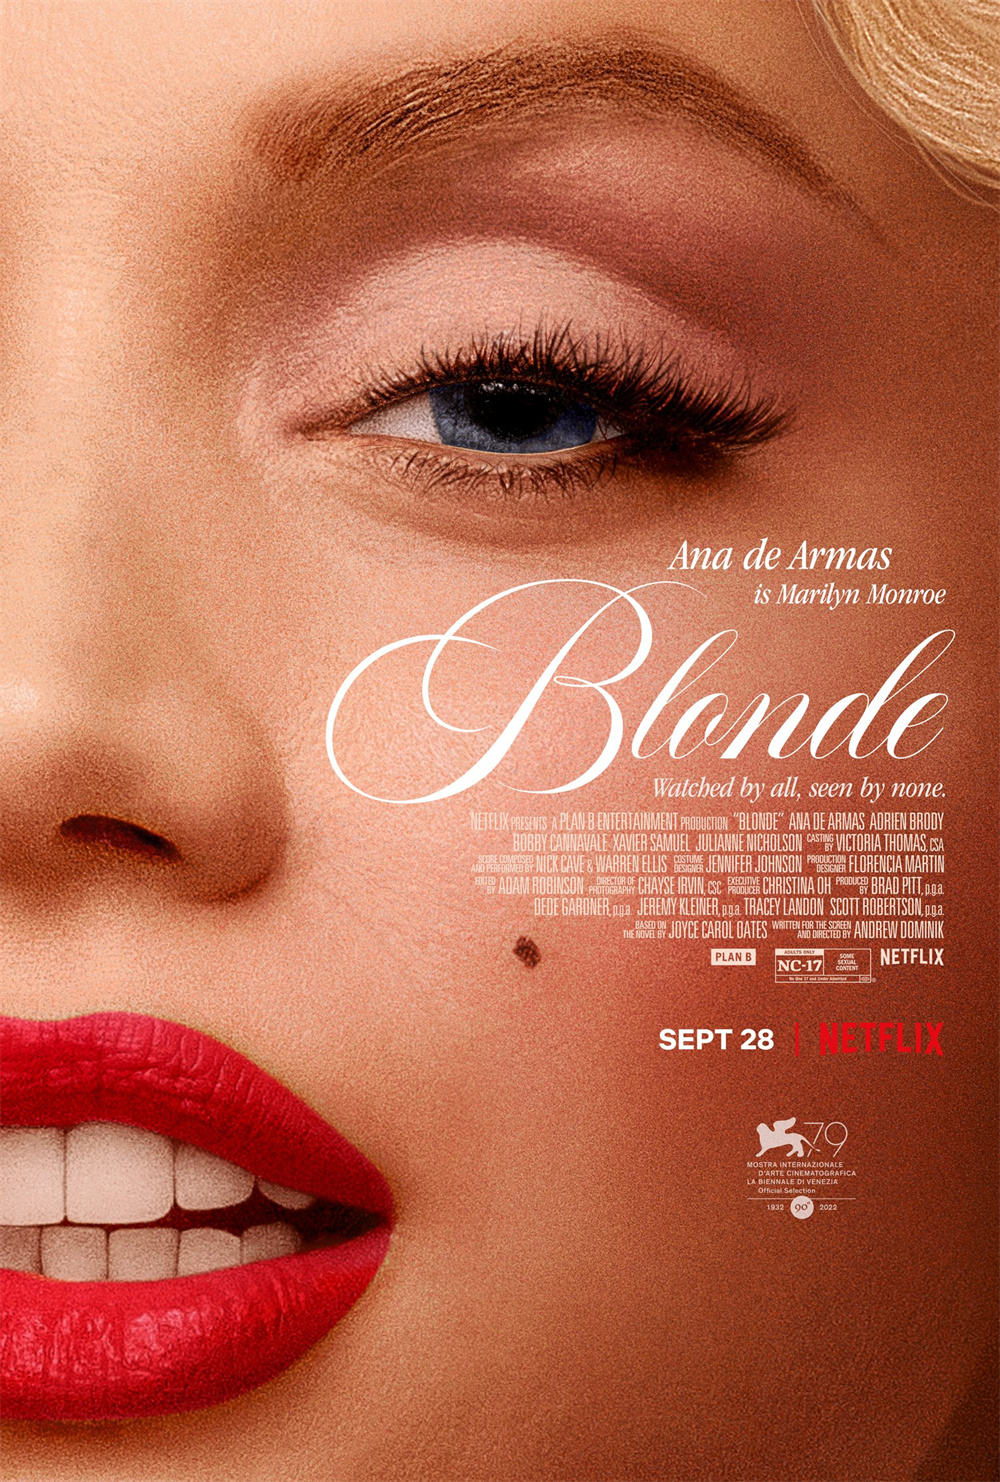 The poster for "Blonde Monroe" states the NC-17 rating.